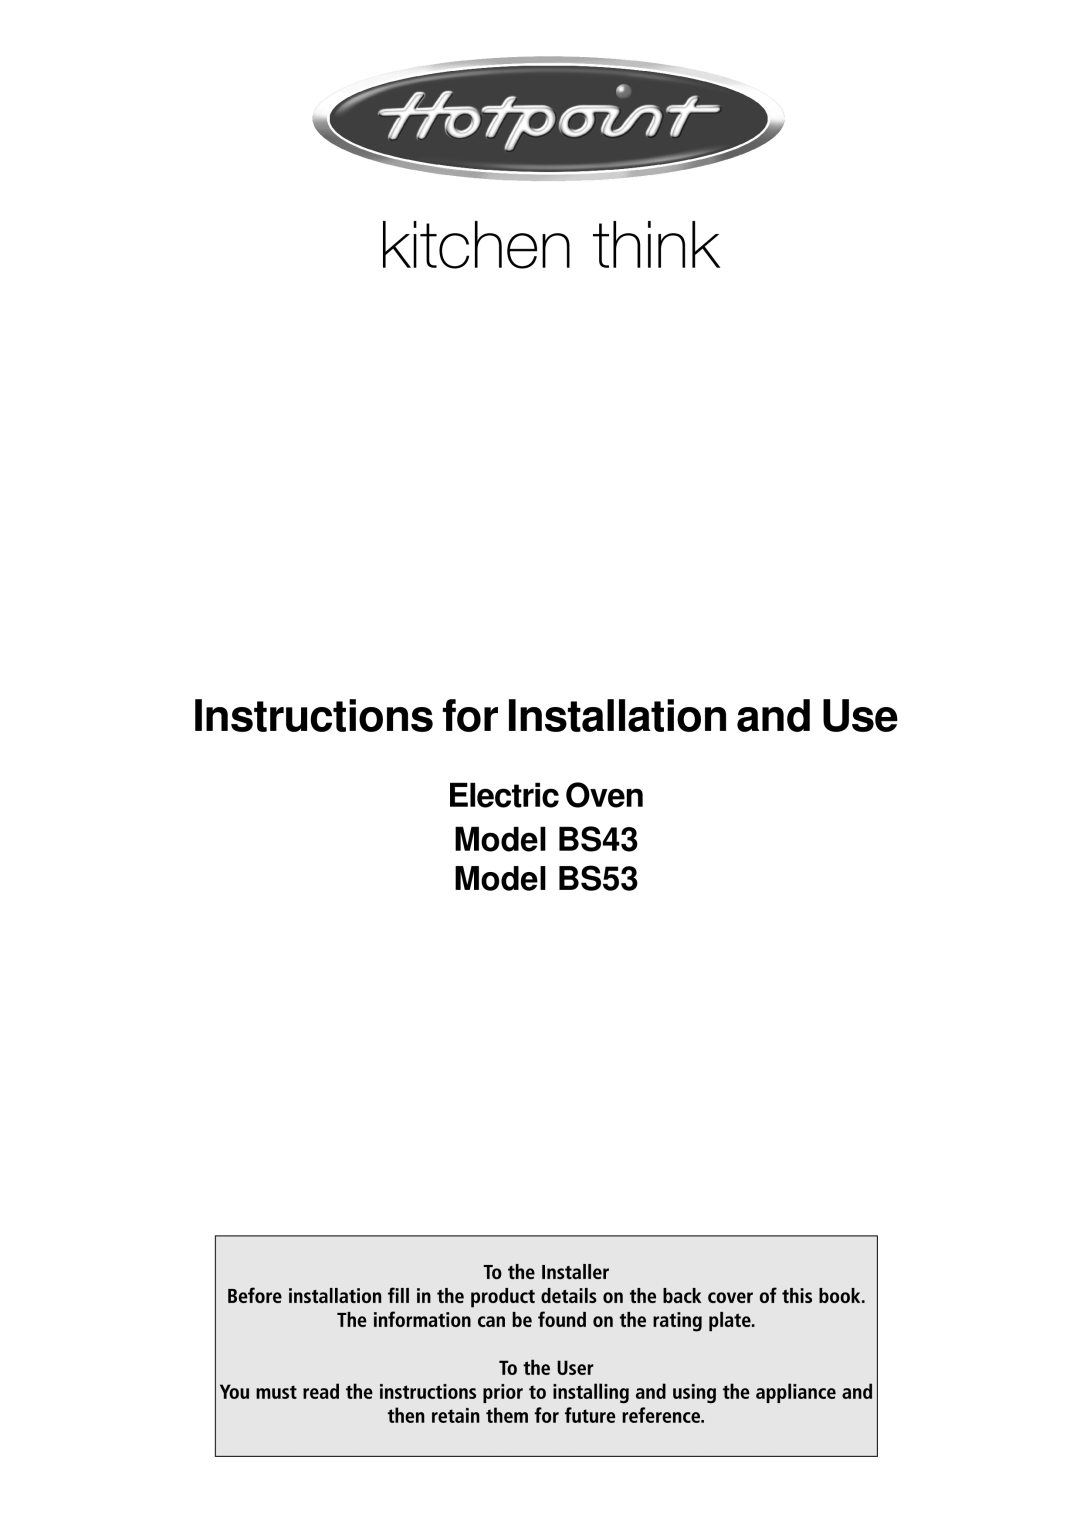 Hotpoint manual Electric Oven Model BS43 Model BS53, Instructions for Installation and Use 